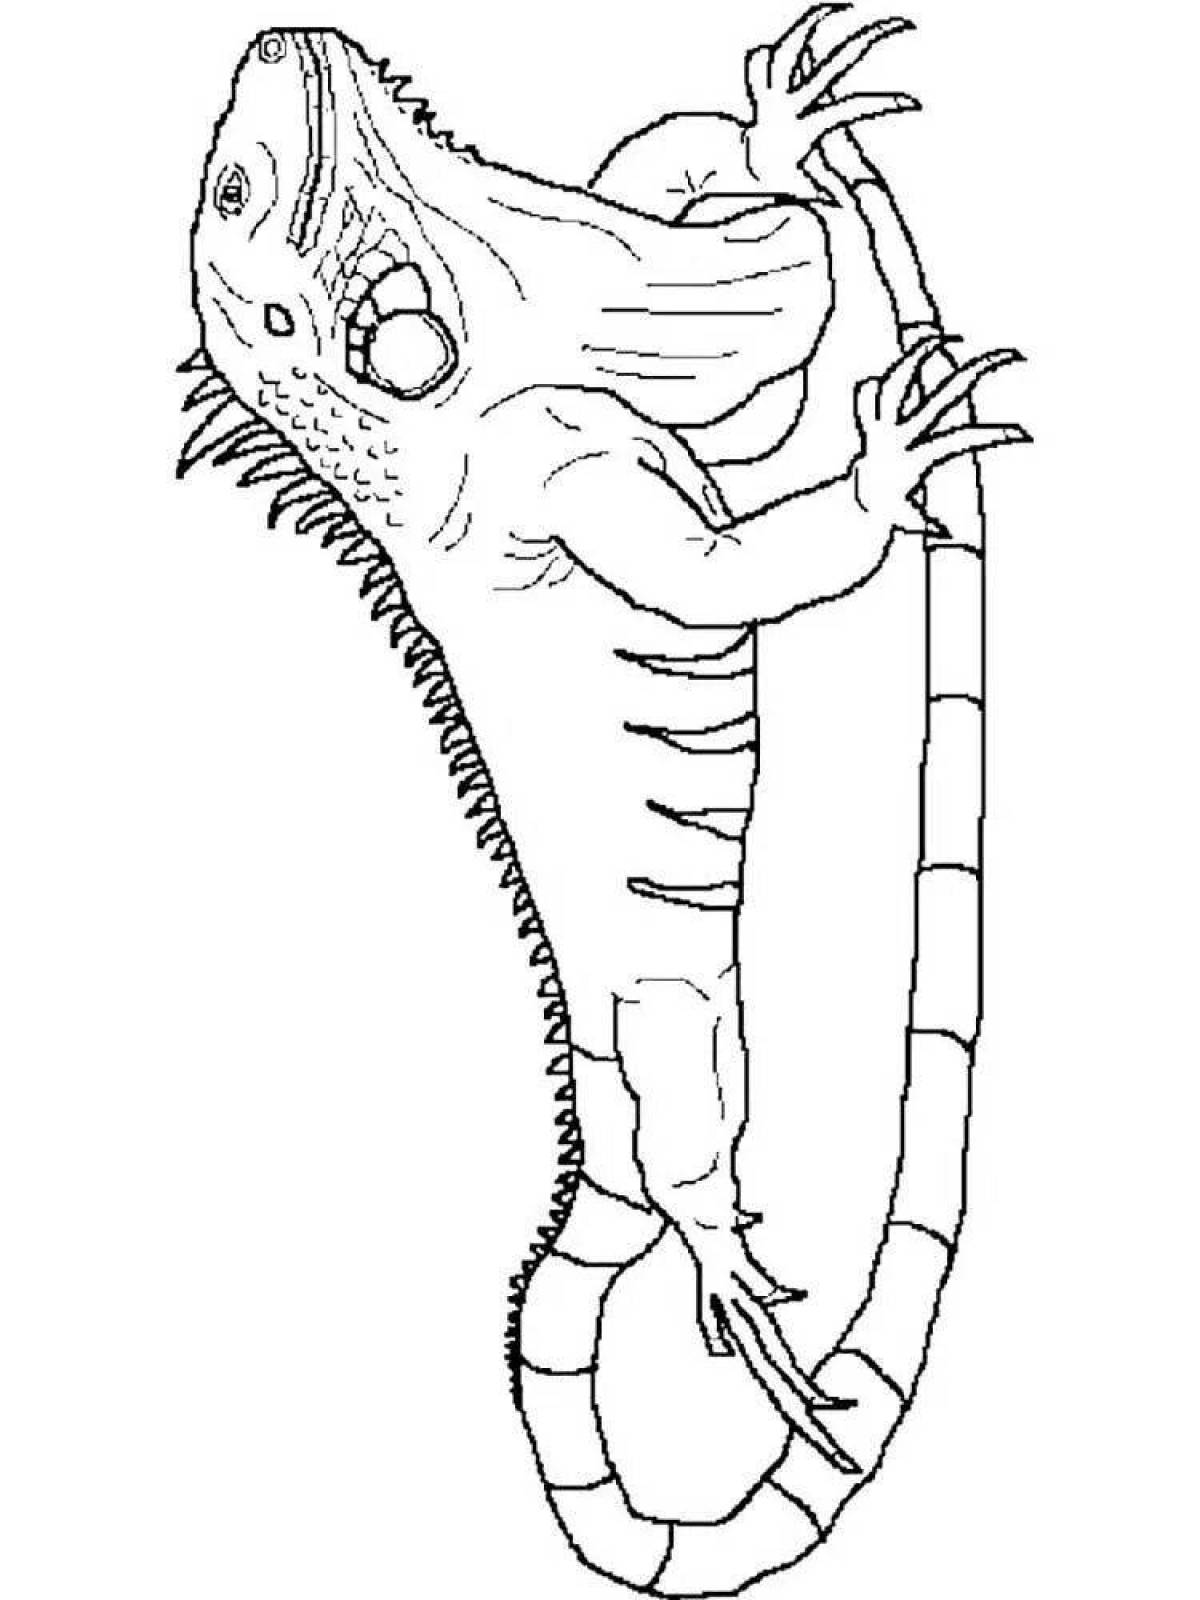 Funny iguana coloring book